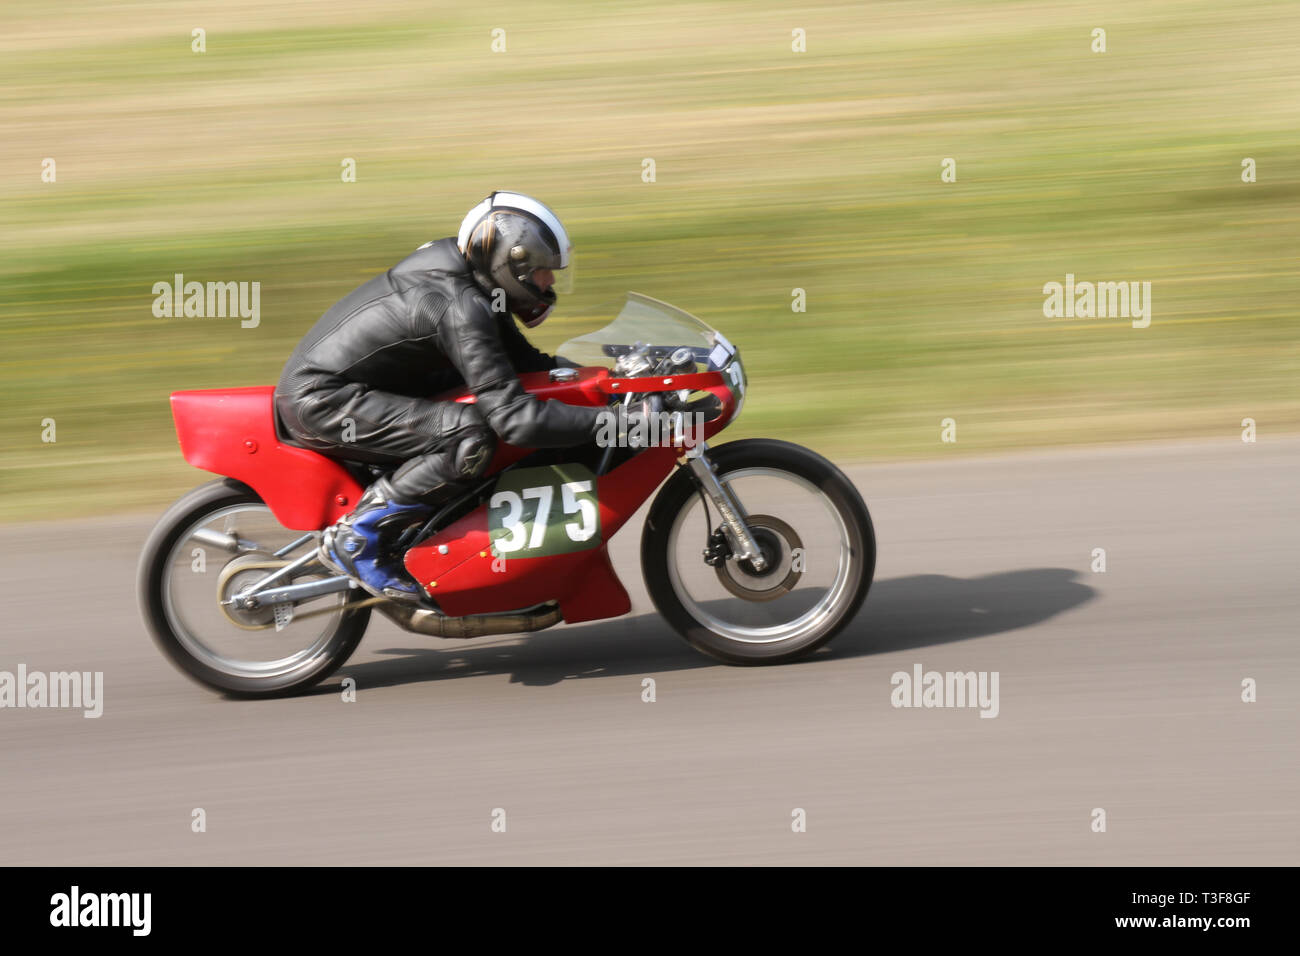 Chorley, Lancashire, UK. April, 2019. Hoghton Tower 43rd Motorcycle Sprint. Rider 375 Edward Elder from Barrow in Furness riding a 1979 175cc Rotax 175 Motorbike at speed. Stock Photo